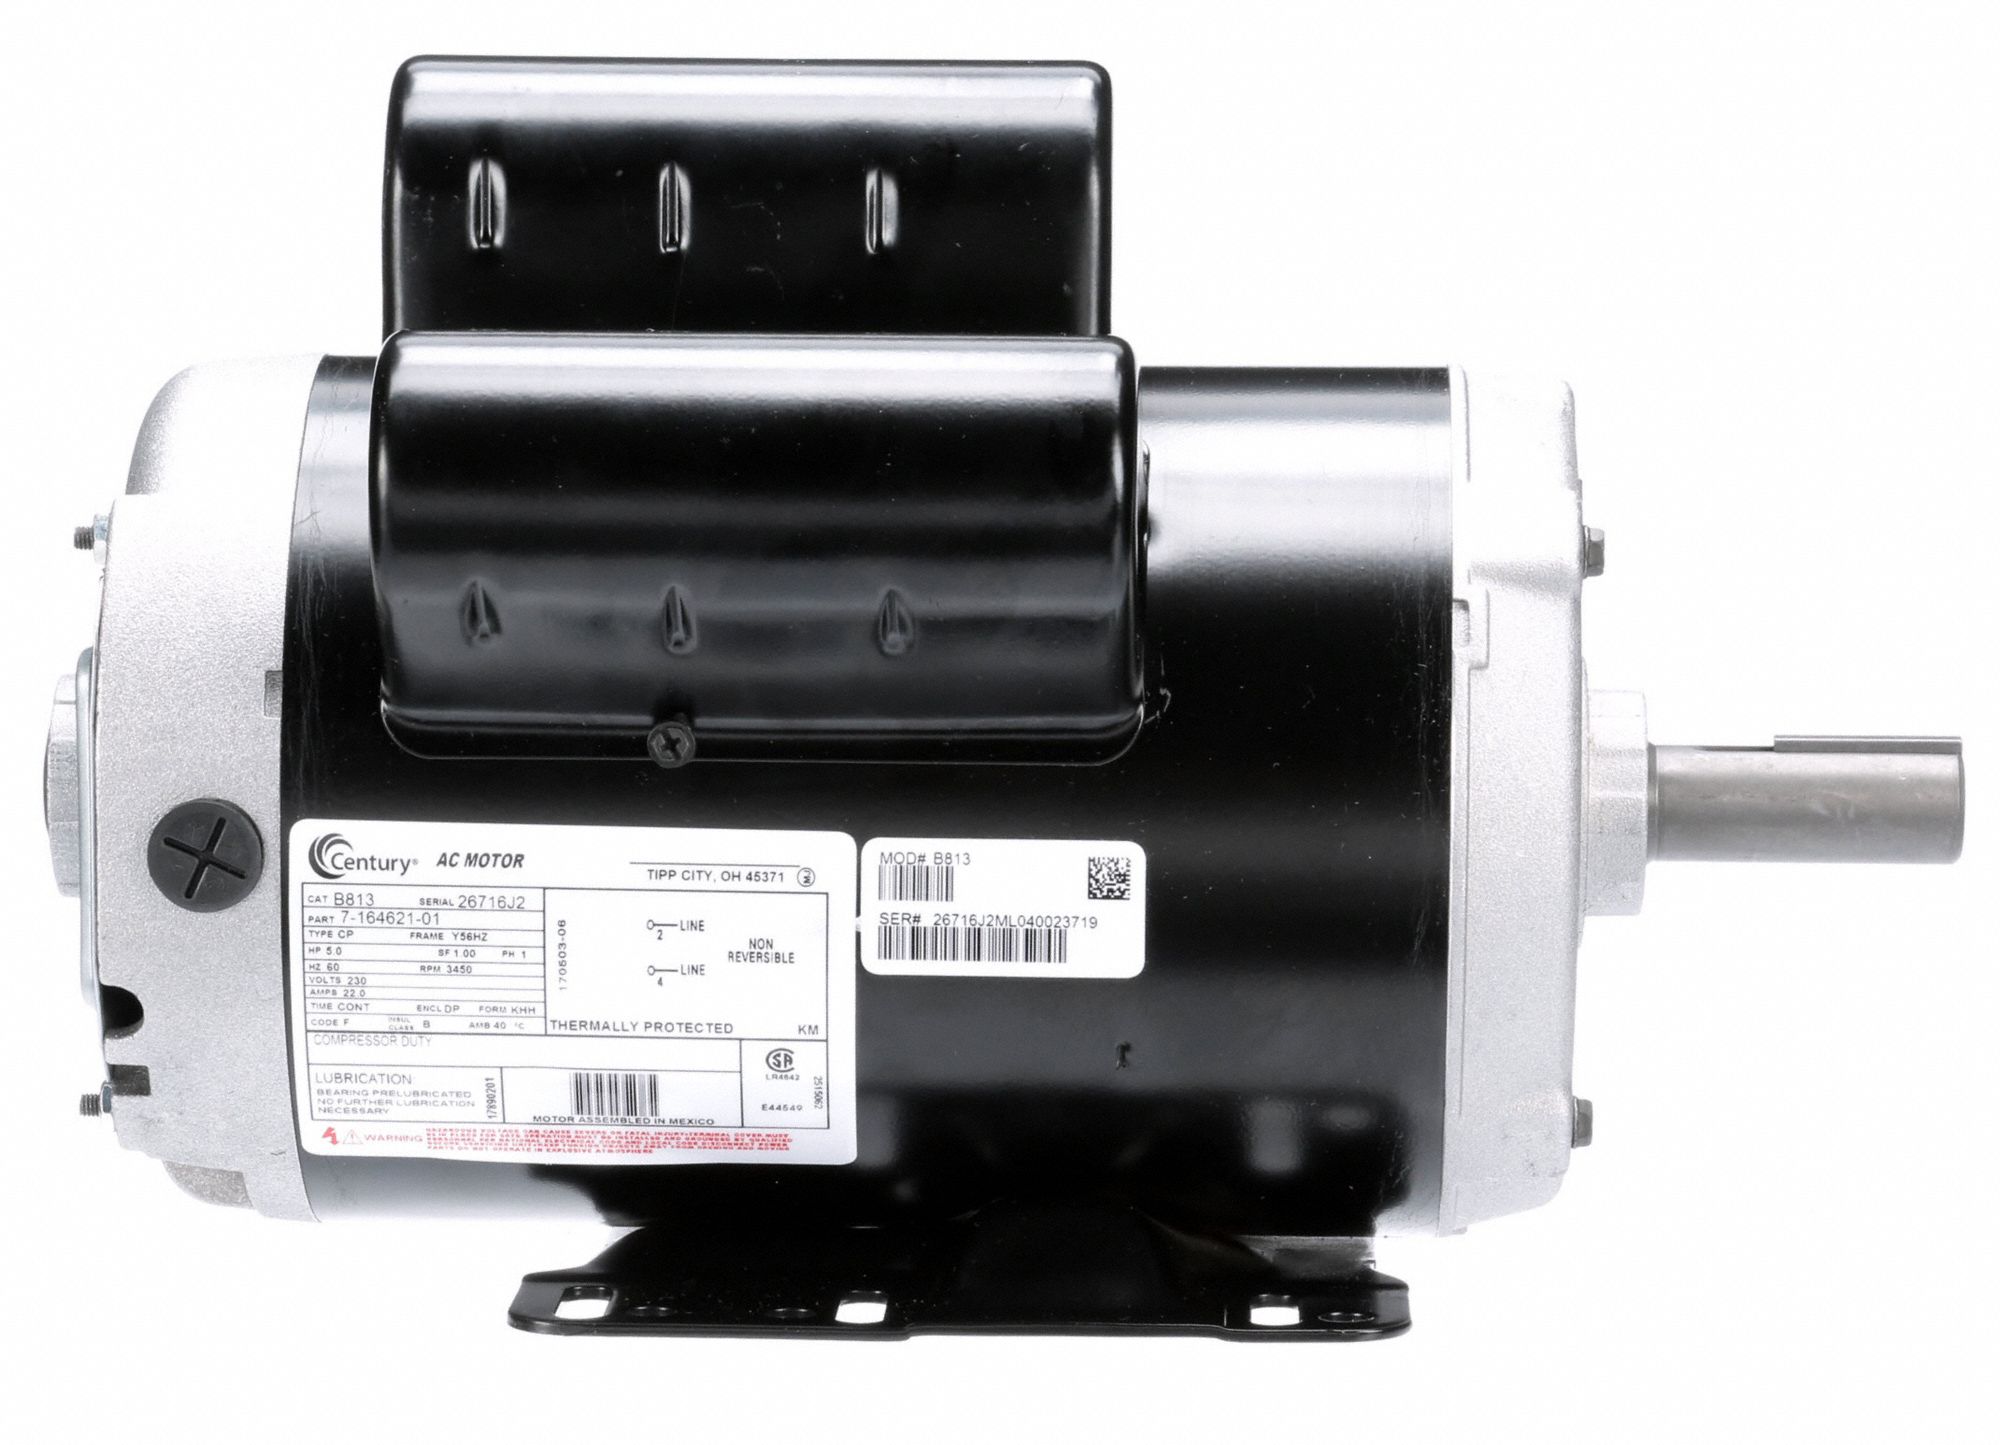 REPLACEMENT FOR CENTURY B813 WEG 5 HP 56HZ 3450 ELECTRIC MOTOR FOR COMPRESSOR 